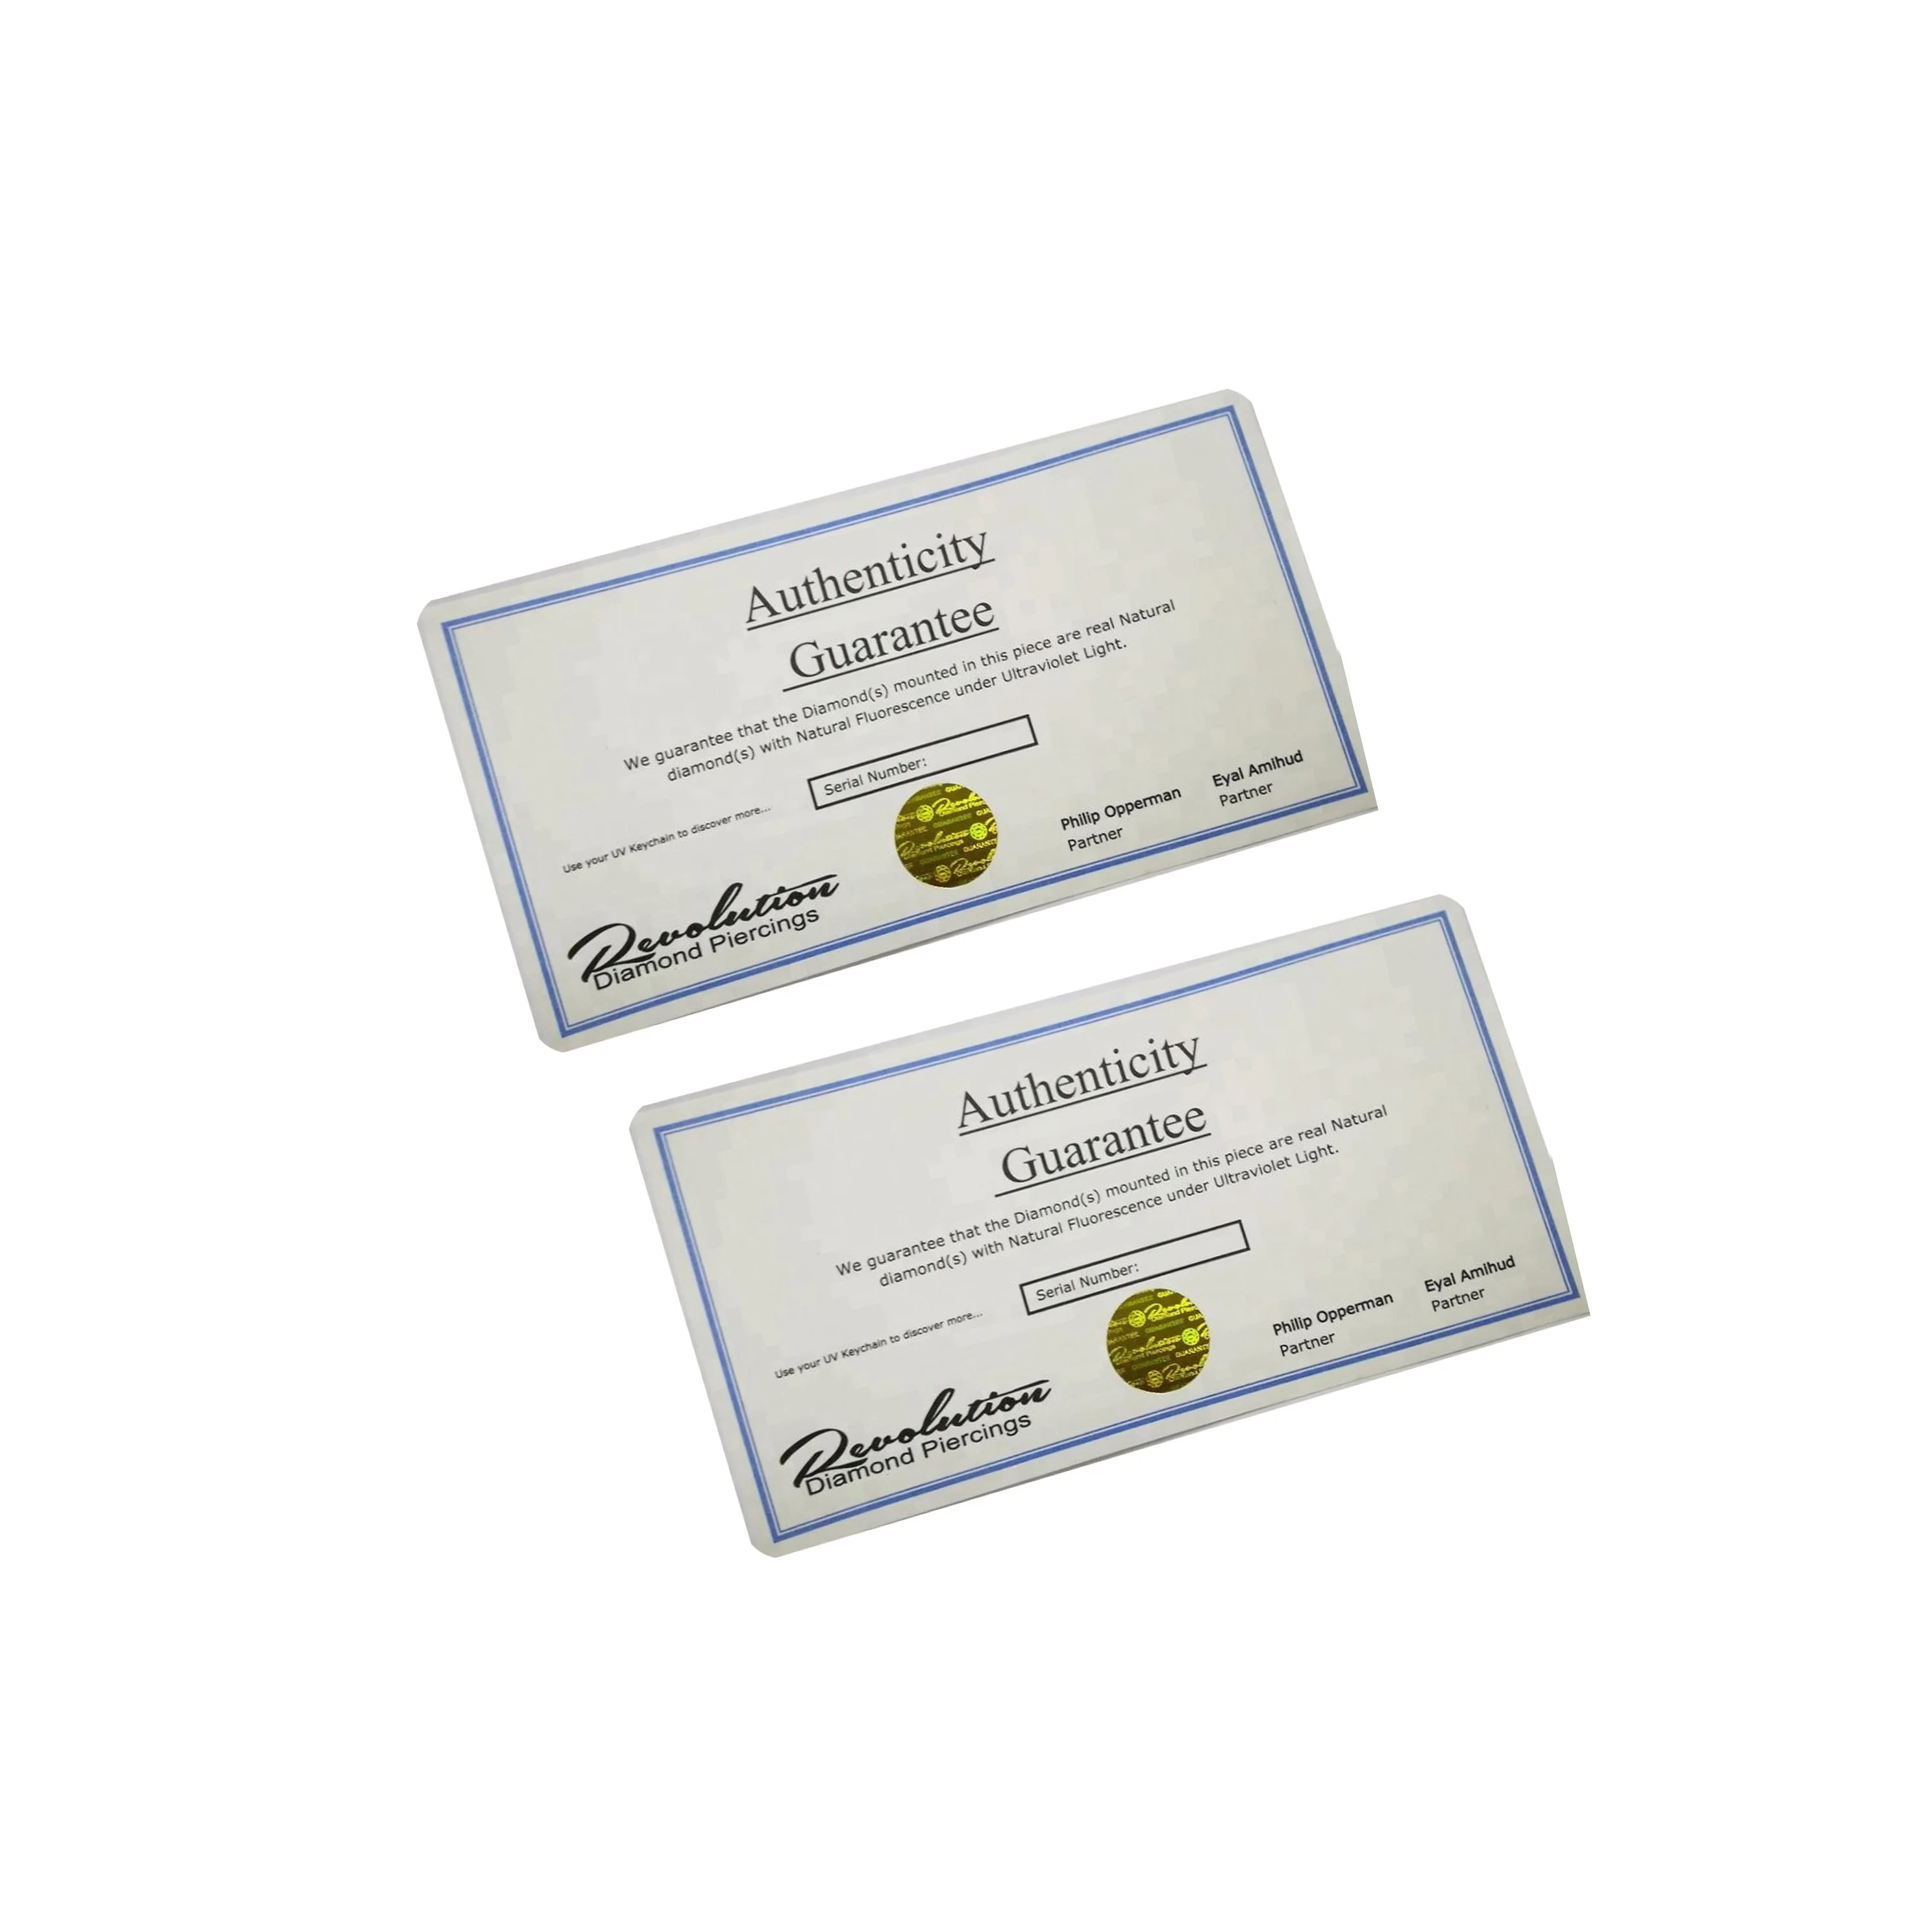 Custom security watermark paper hologram certificate for anti-counterfeiting feature